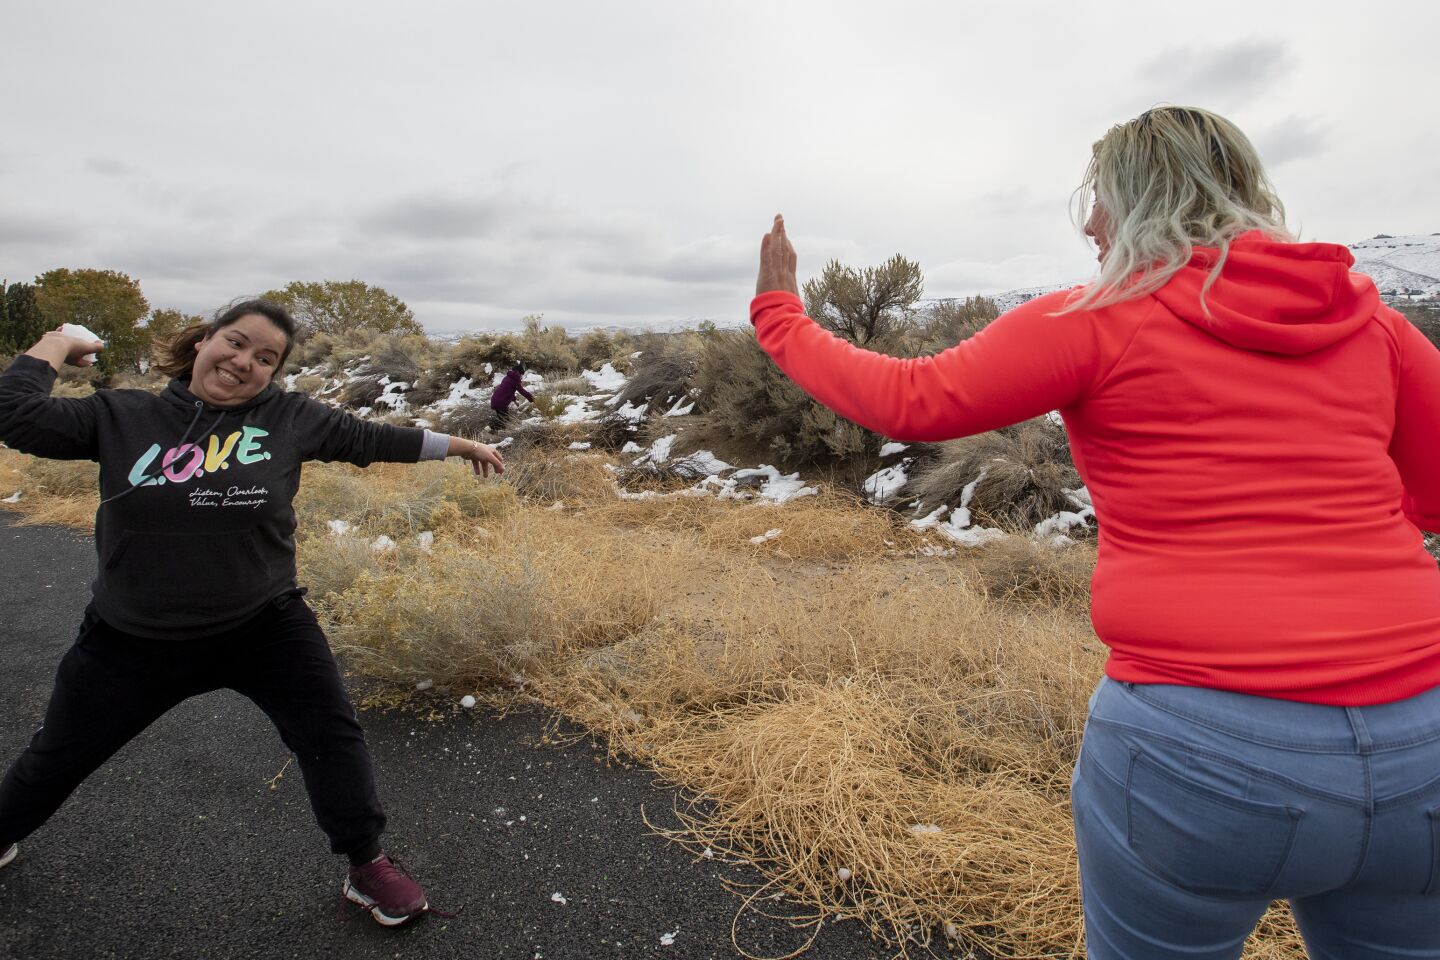 Pacoima residents Andrea Hernandez, right, lifts a hand to deflect a snowball about to be thrown by friend Maria Salazar, left, as desert snow lingers in the Antelope Valley town of Palmdale in Palmdale, Calif., on Dec. 1, 2019.